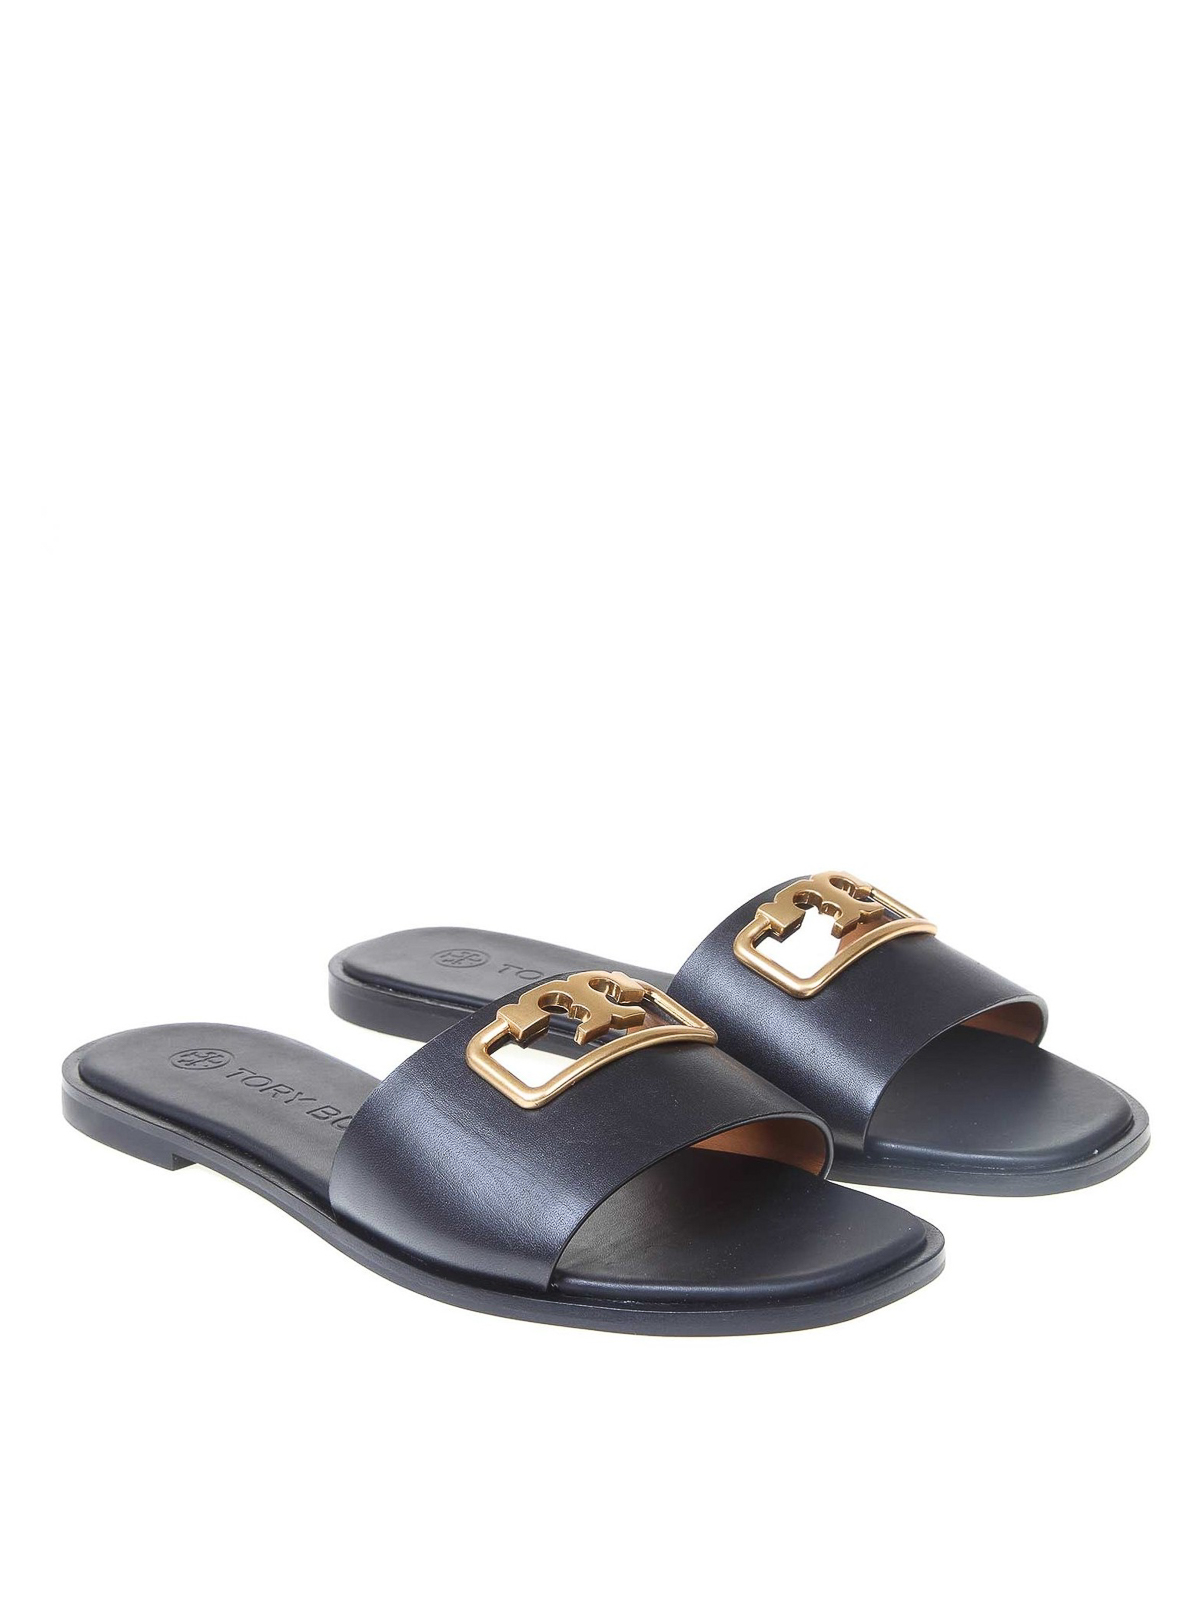 Sandals Tory Burch - Selby slides - 63527006 | Shop online at iKRIX